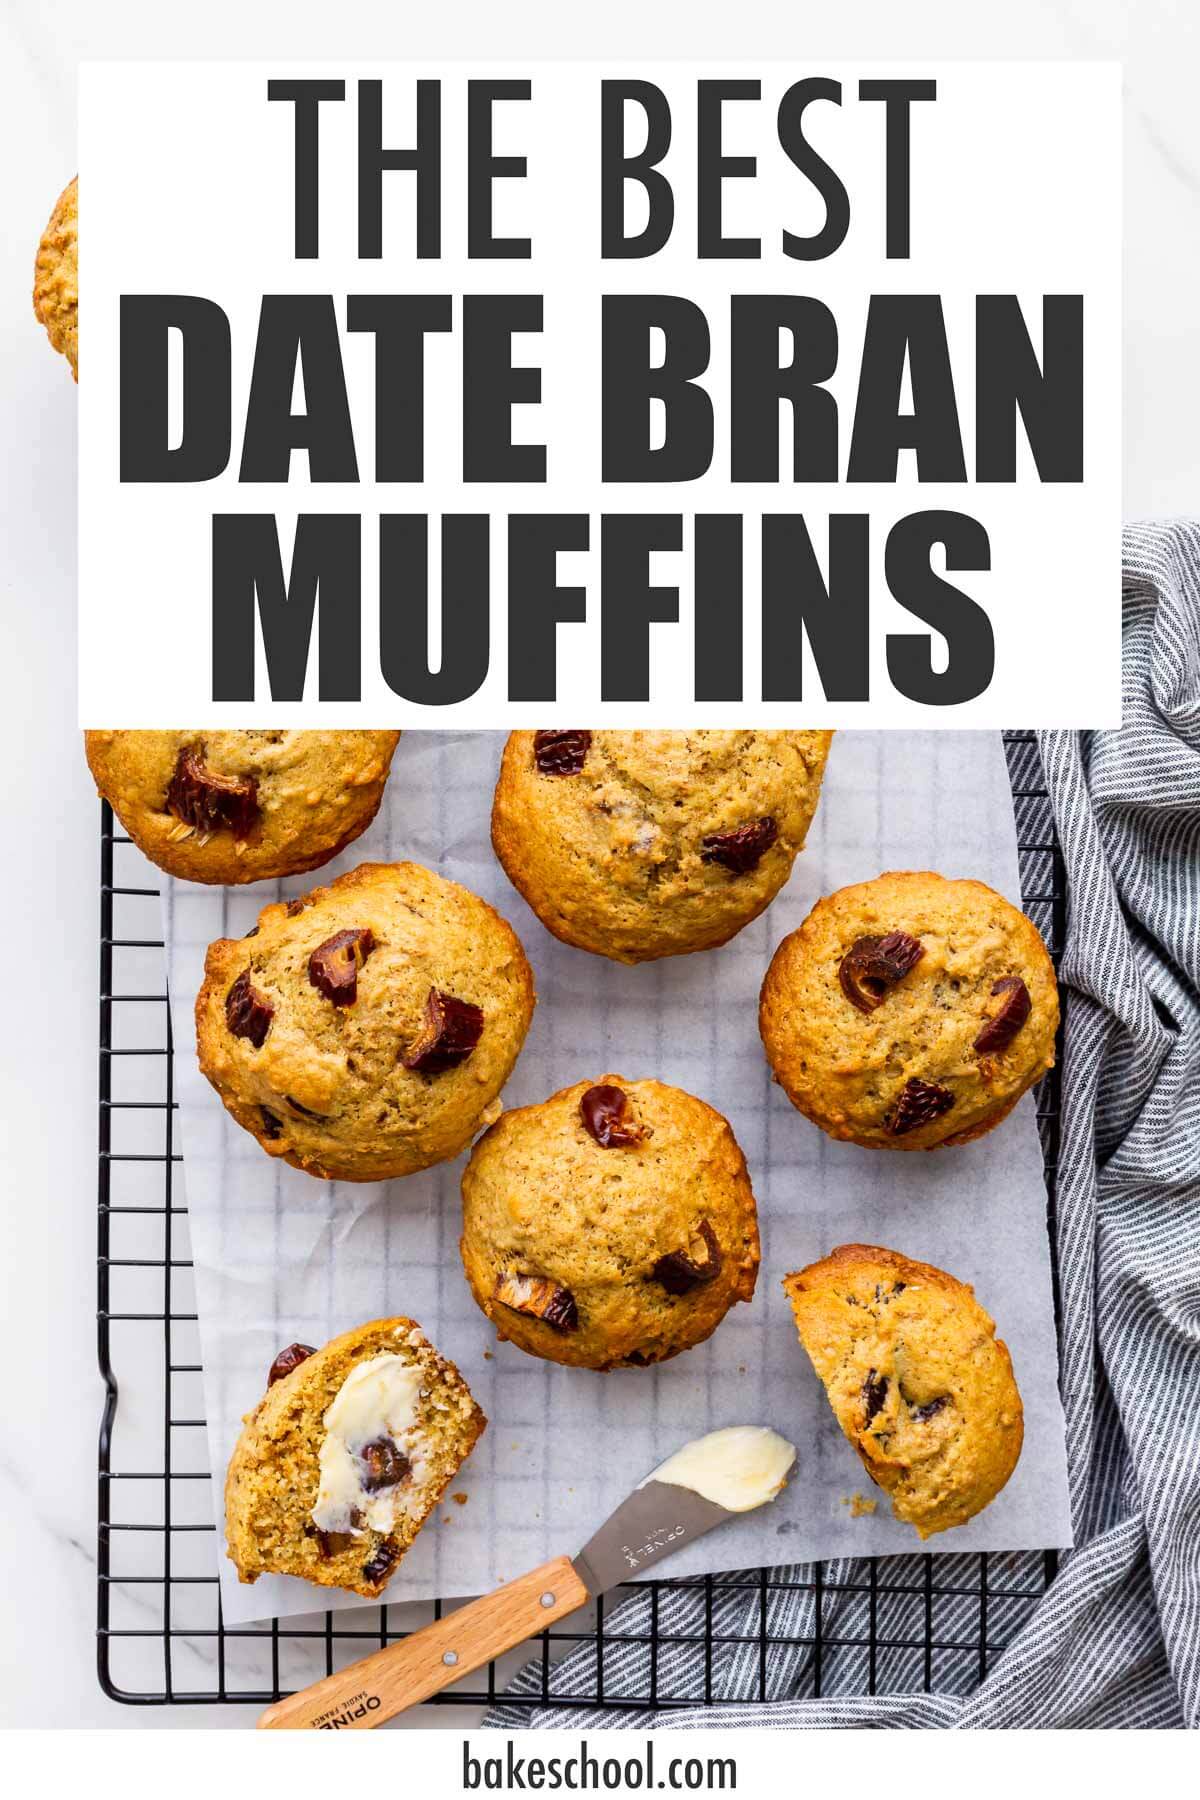 Date bran muffins on a cooling rack, served with butter. Text overlay on image reads "The best date bran muffins."